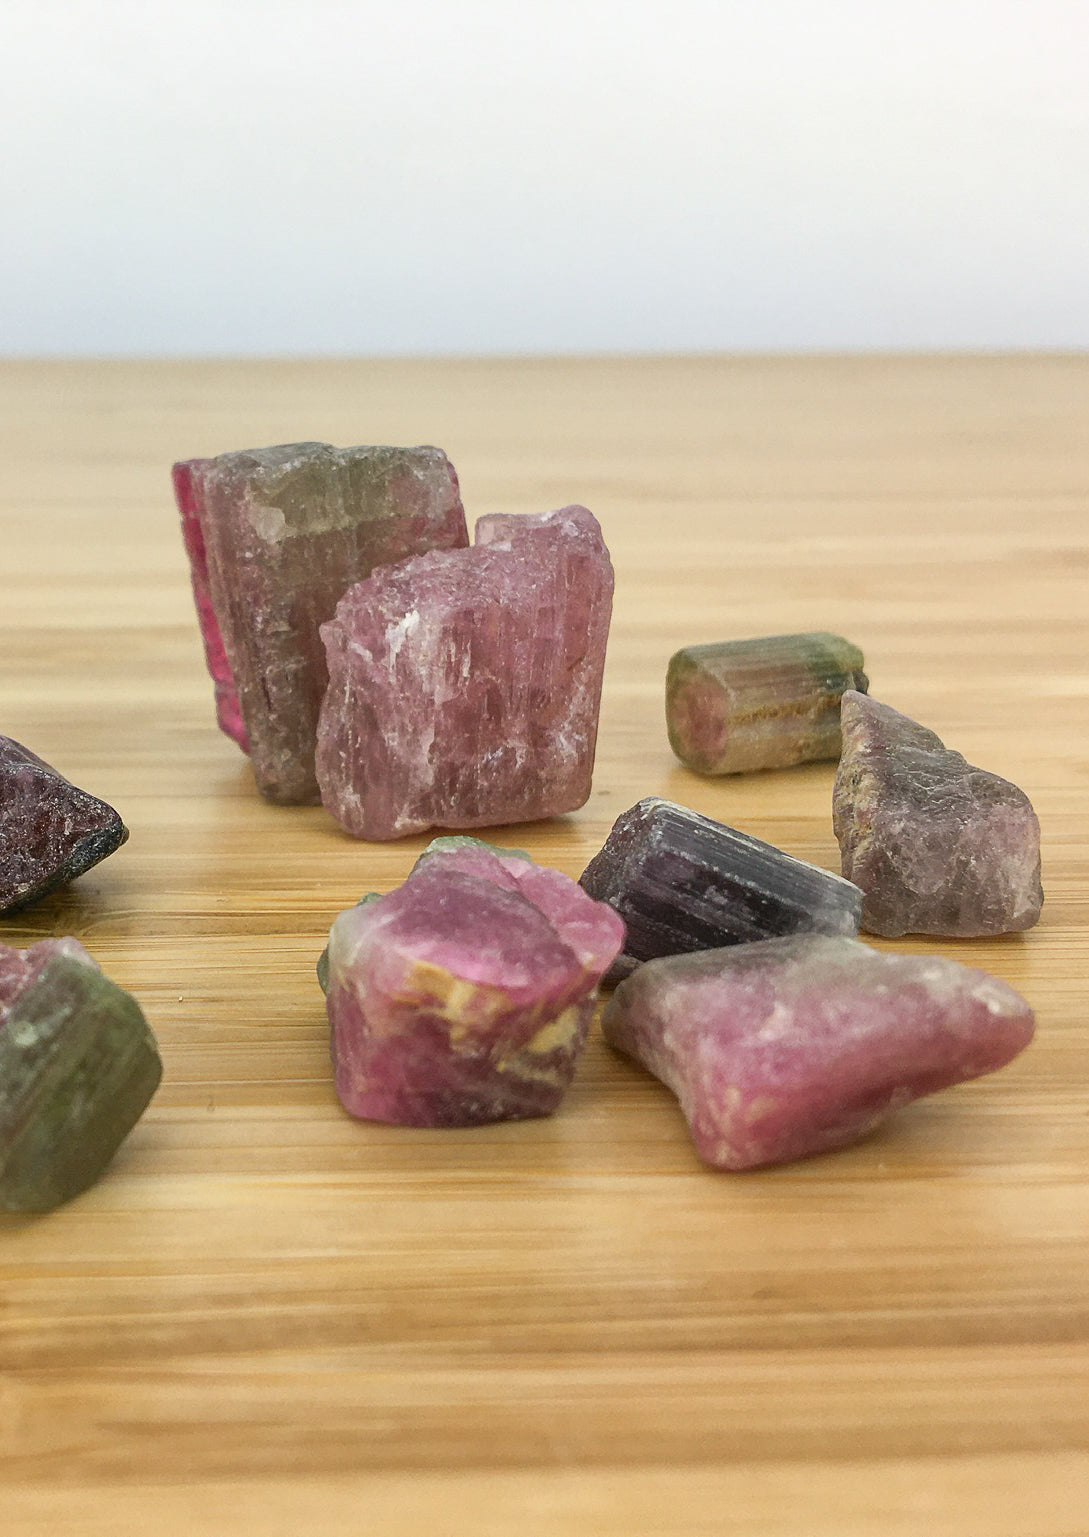 well formed elbaite (tourmaline) crystals. They are pink and green and show concentric zoning.